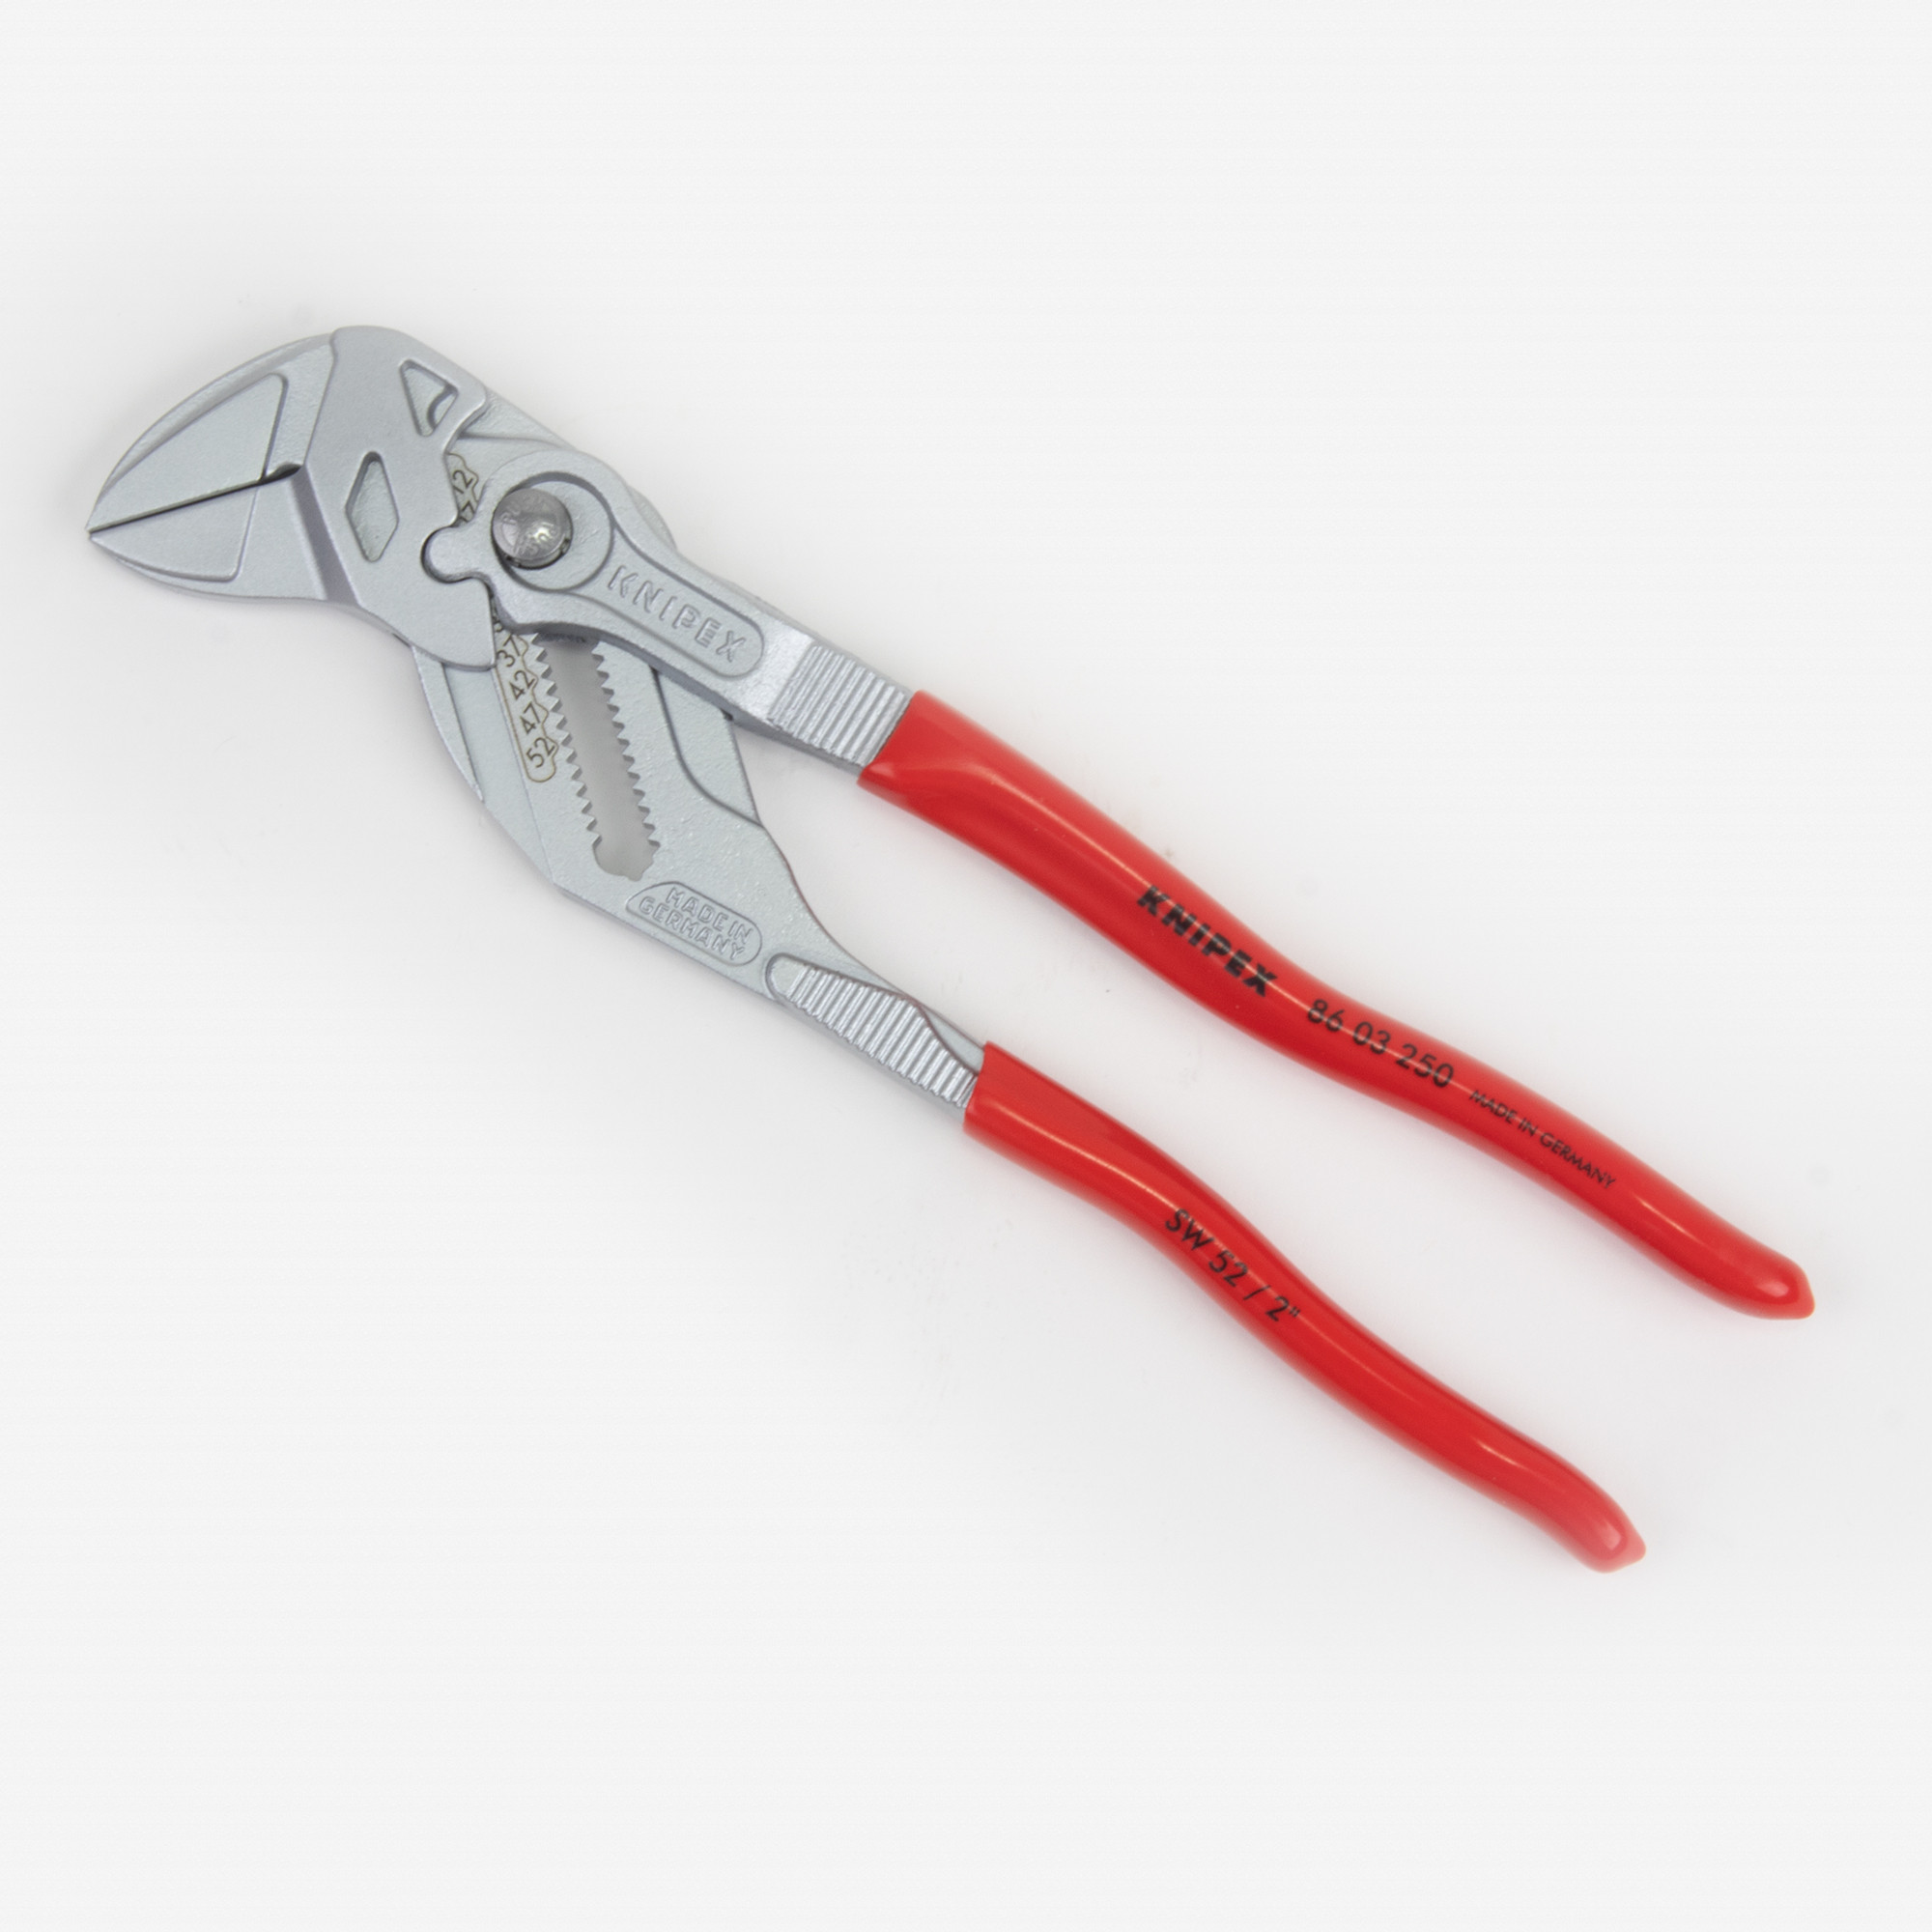 Knipex 10" Pliers Wrench - Chrome Plastic Grip